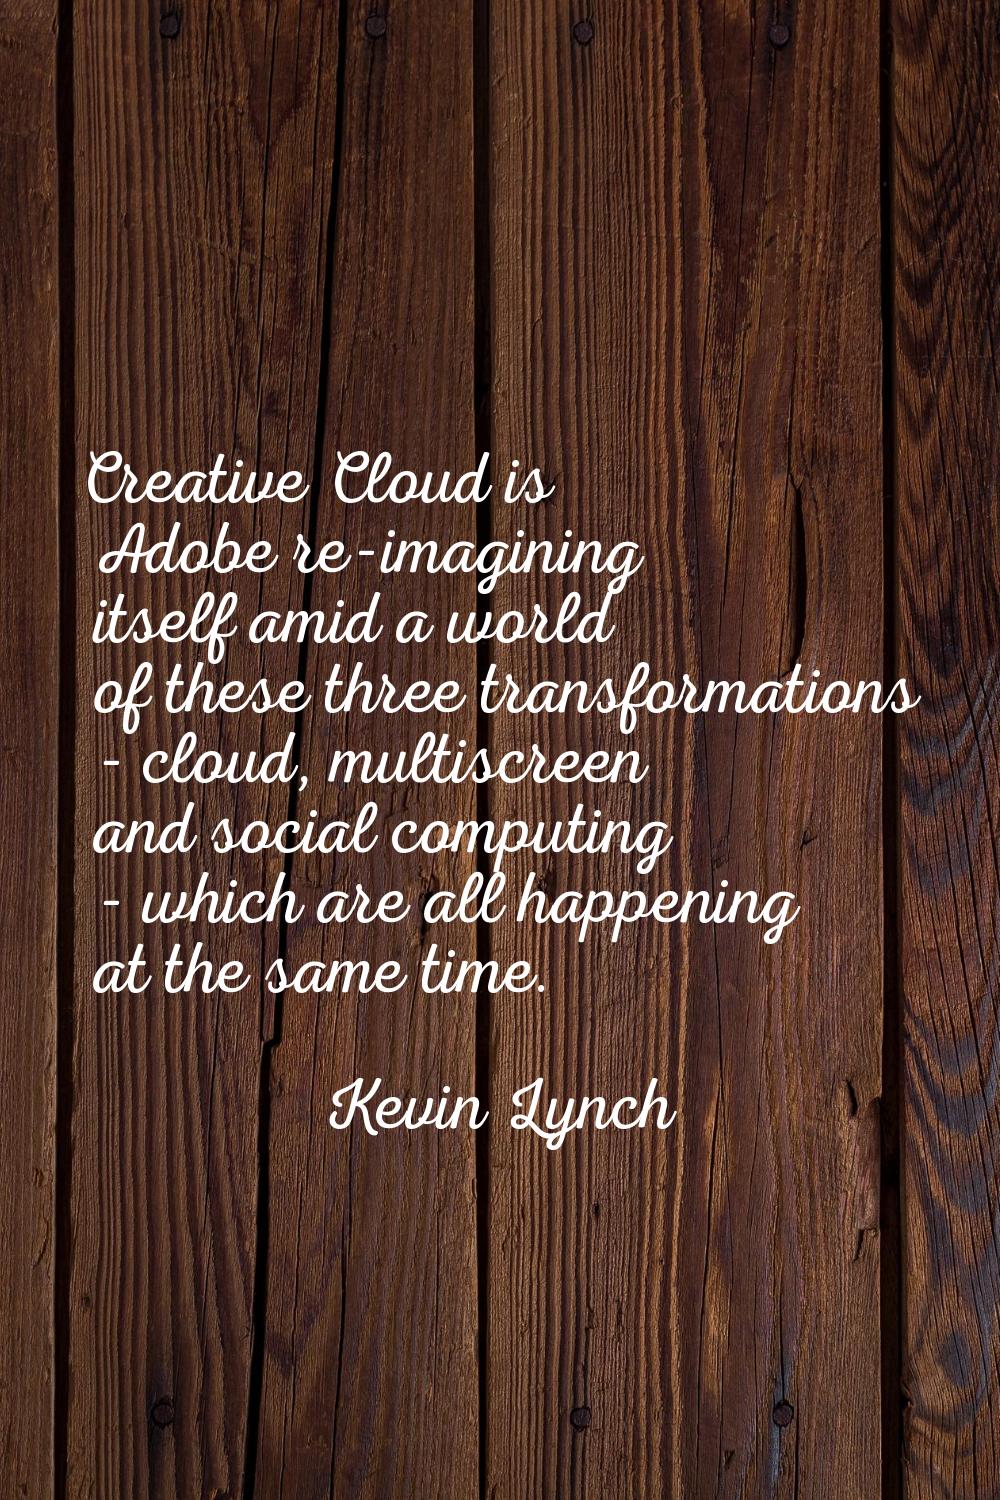 Creative Cloud is Adobe re-imagining itself amid a world of these three transformations - cloud, mu